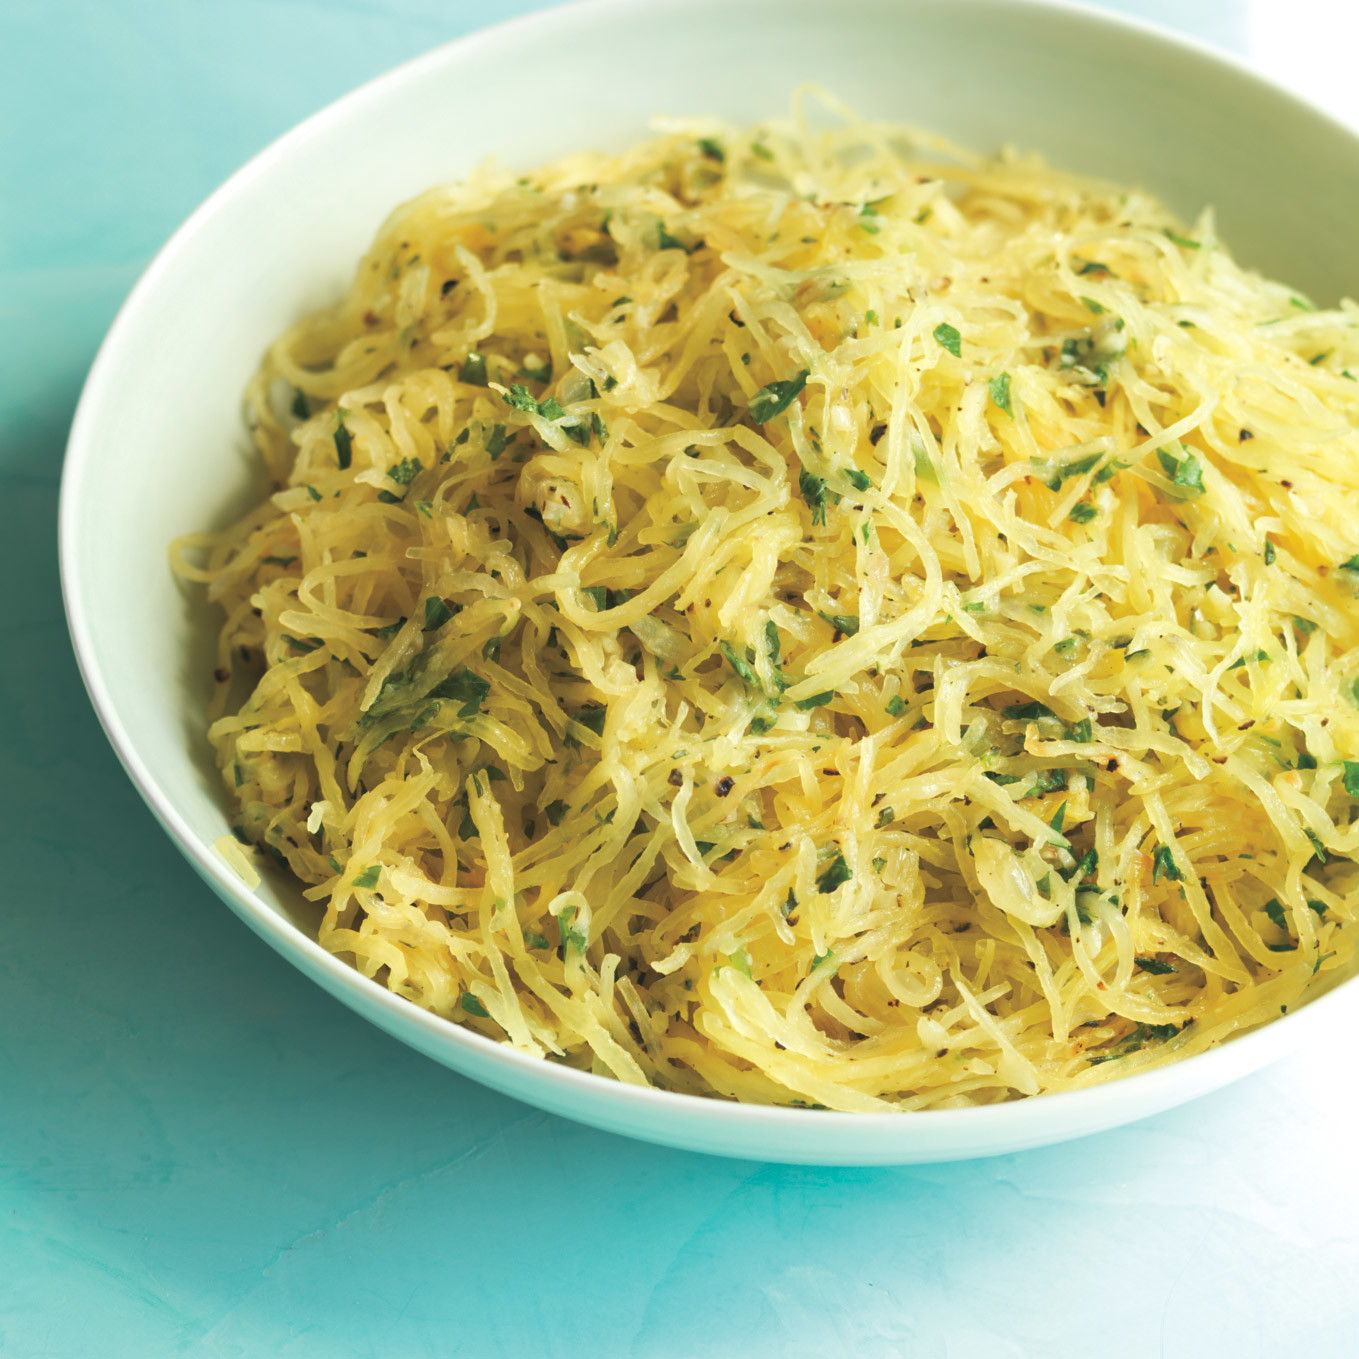 Roasted Spaghetti Squash with Parmesan and Herbs